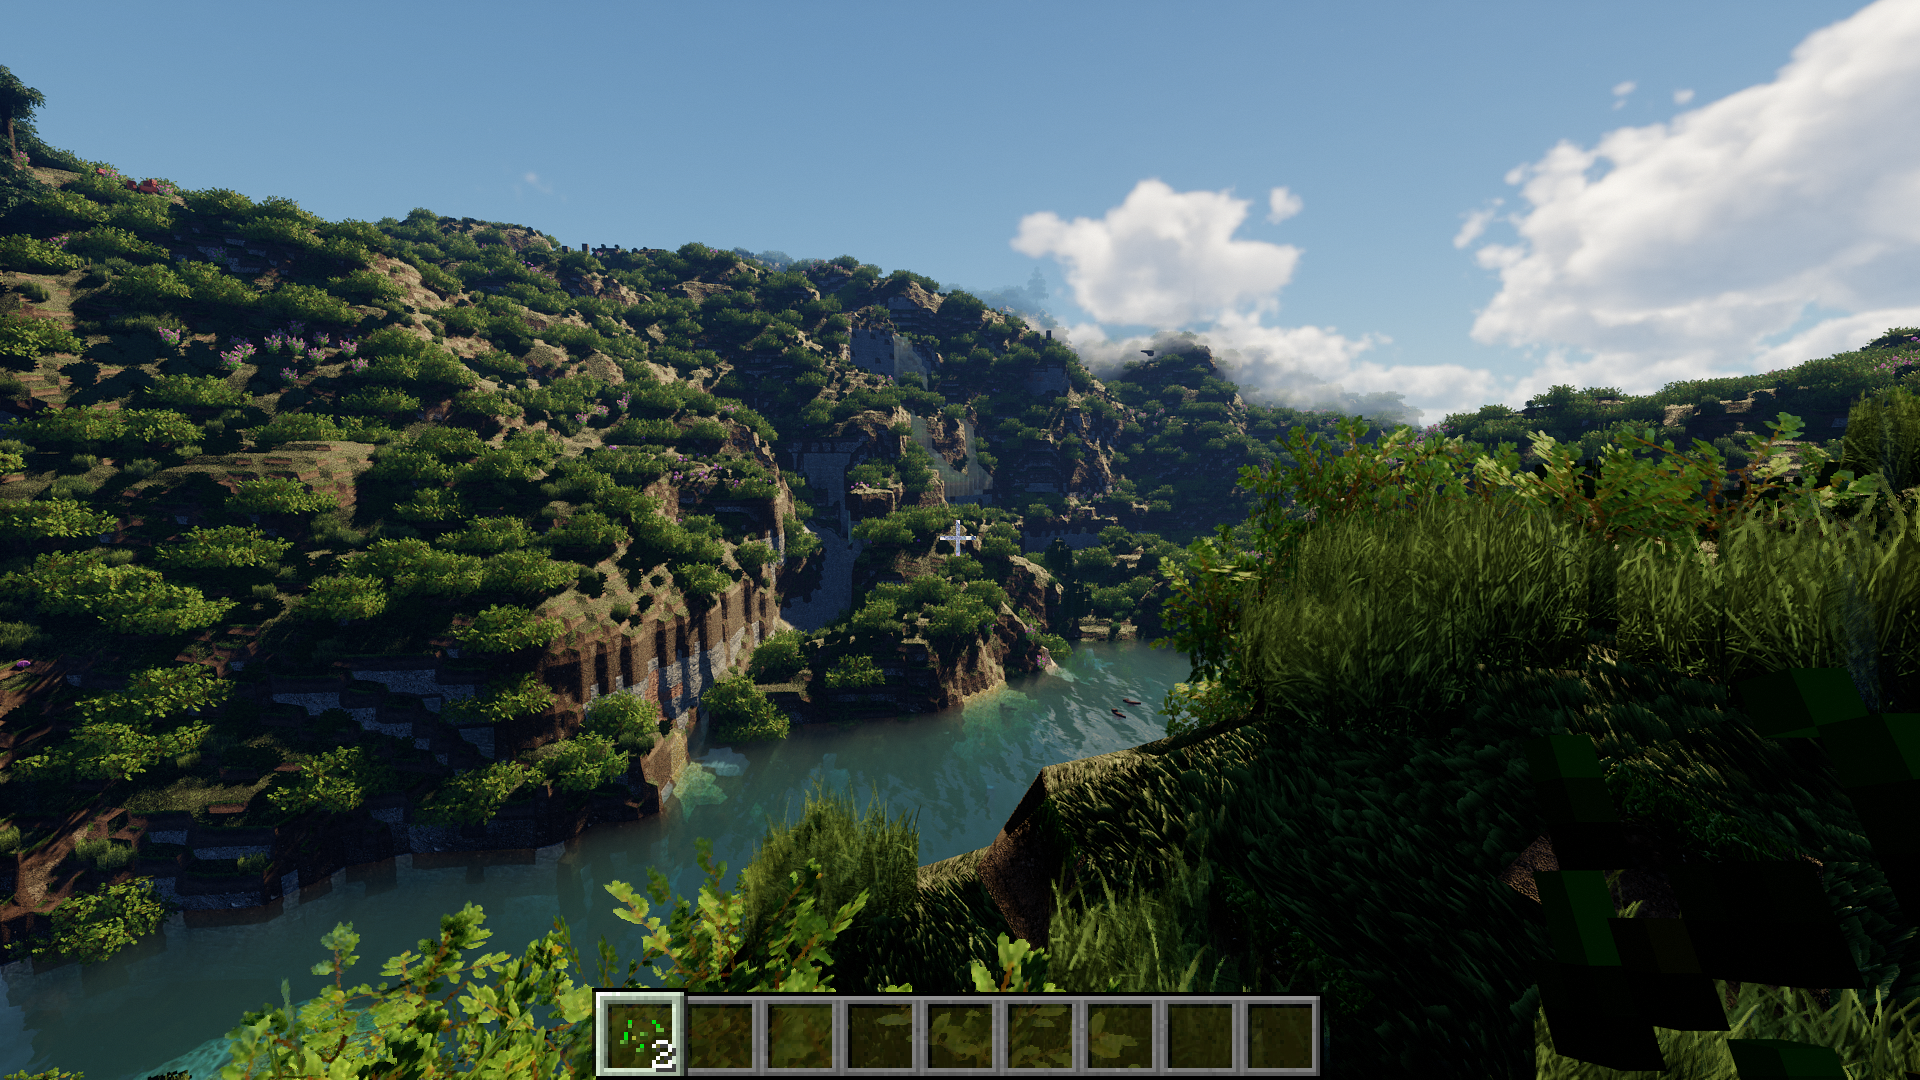 images/2406/14/CTMPOMFIX_Shaders_6.png